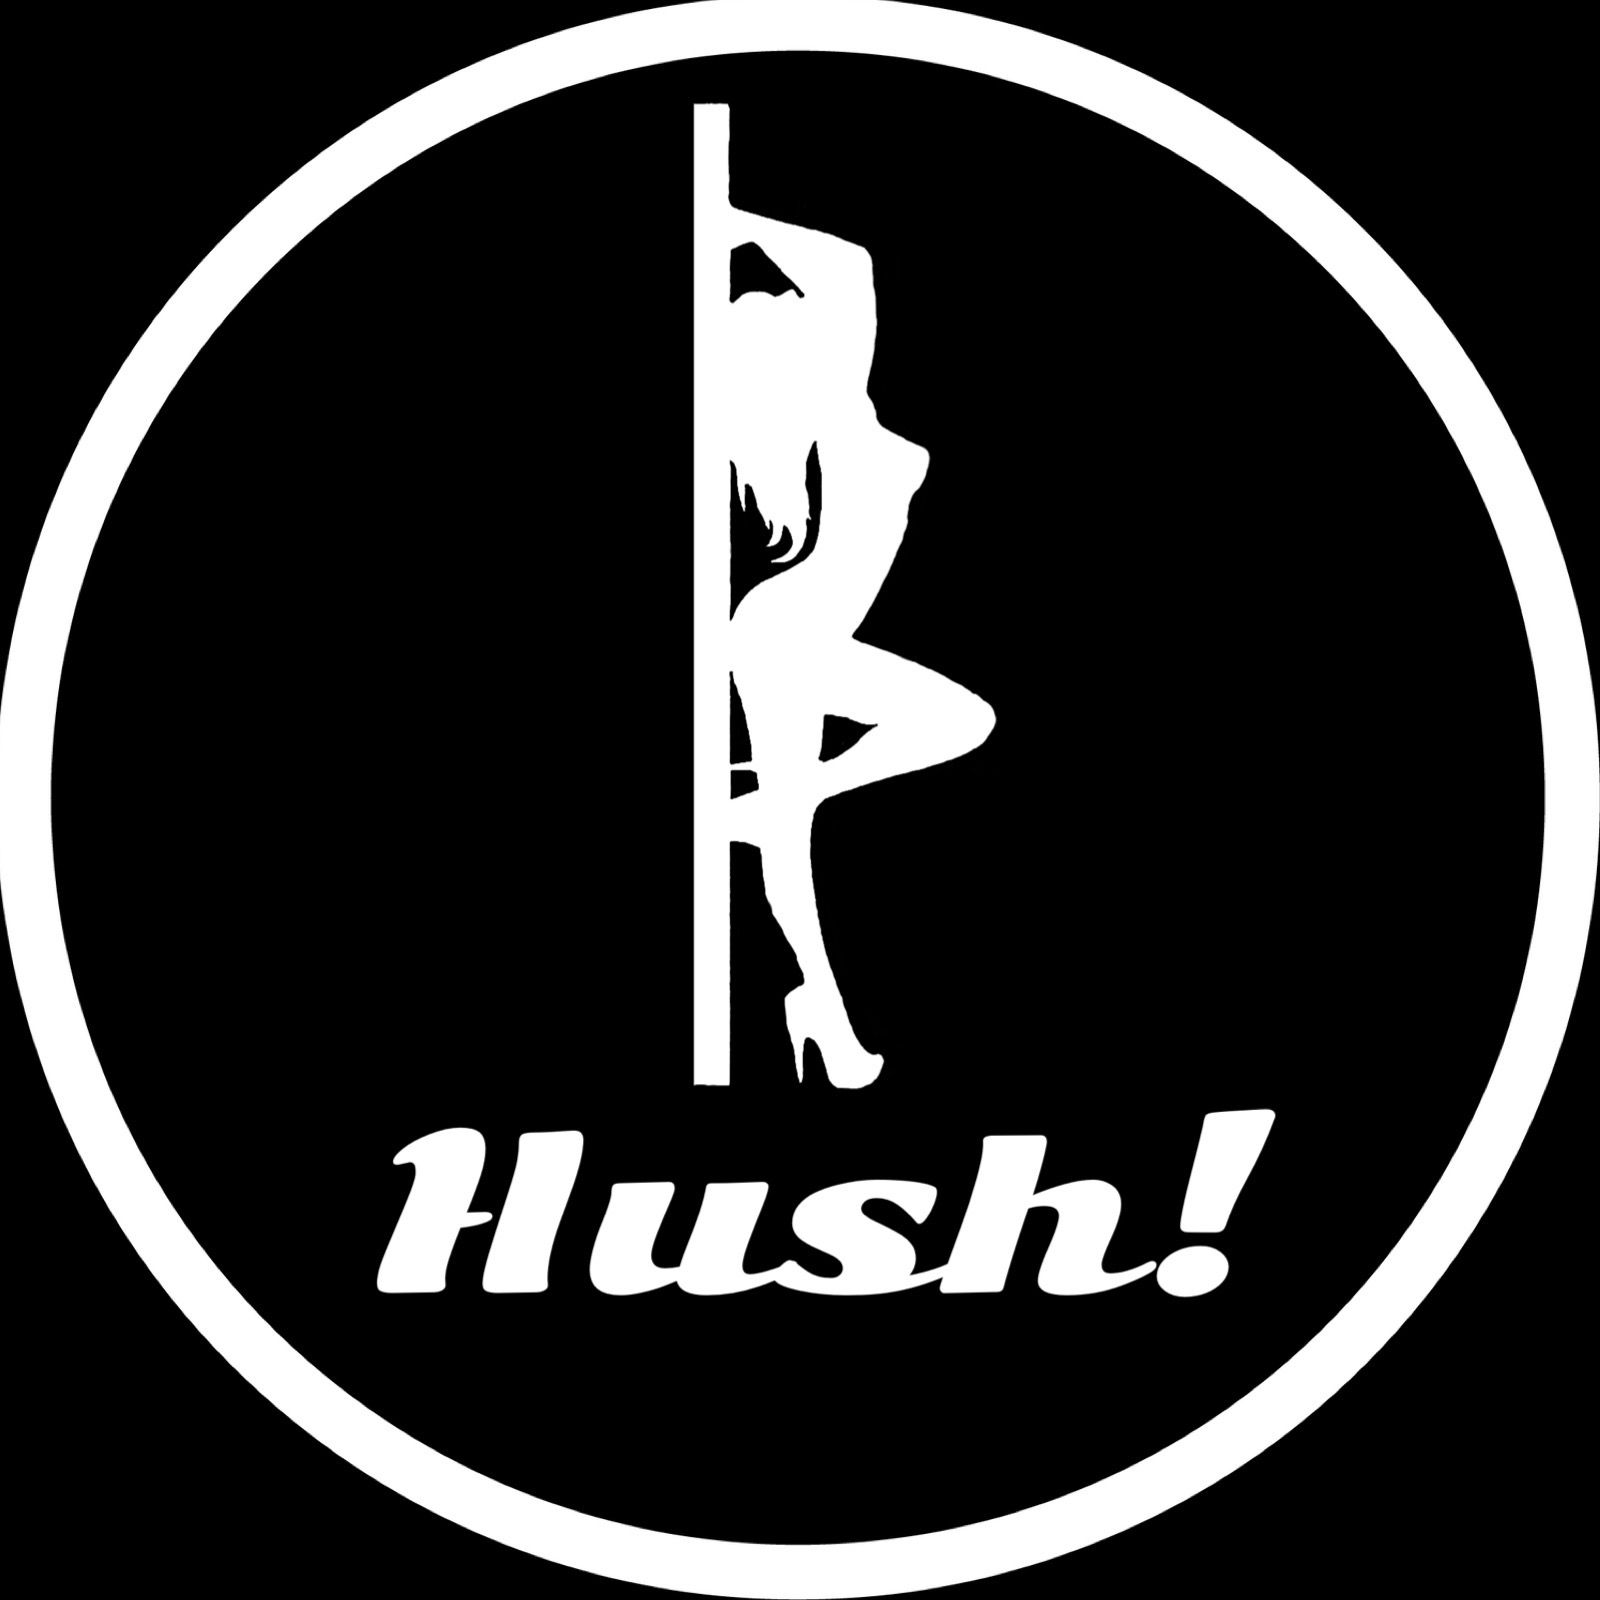 Hush! - Hush! Vol. 53- One on One with Kelley Cabbana